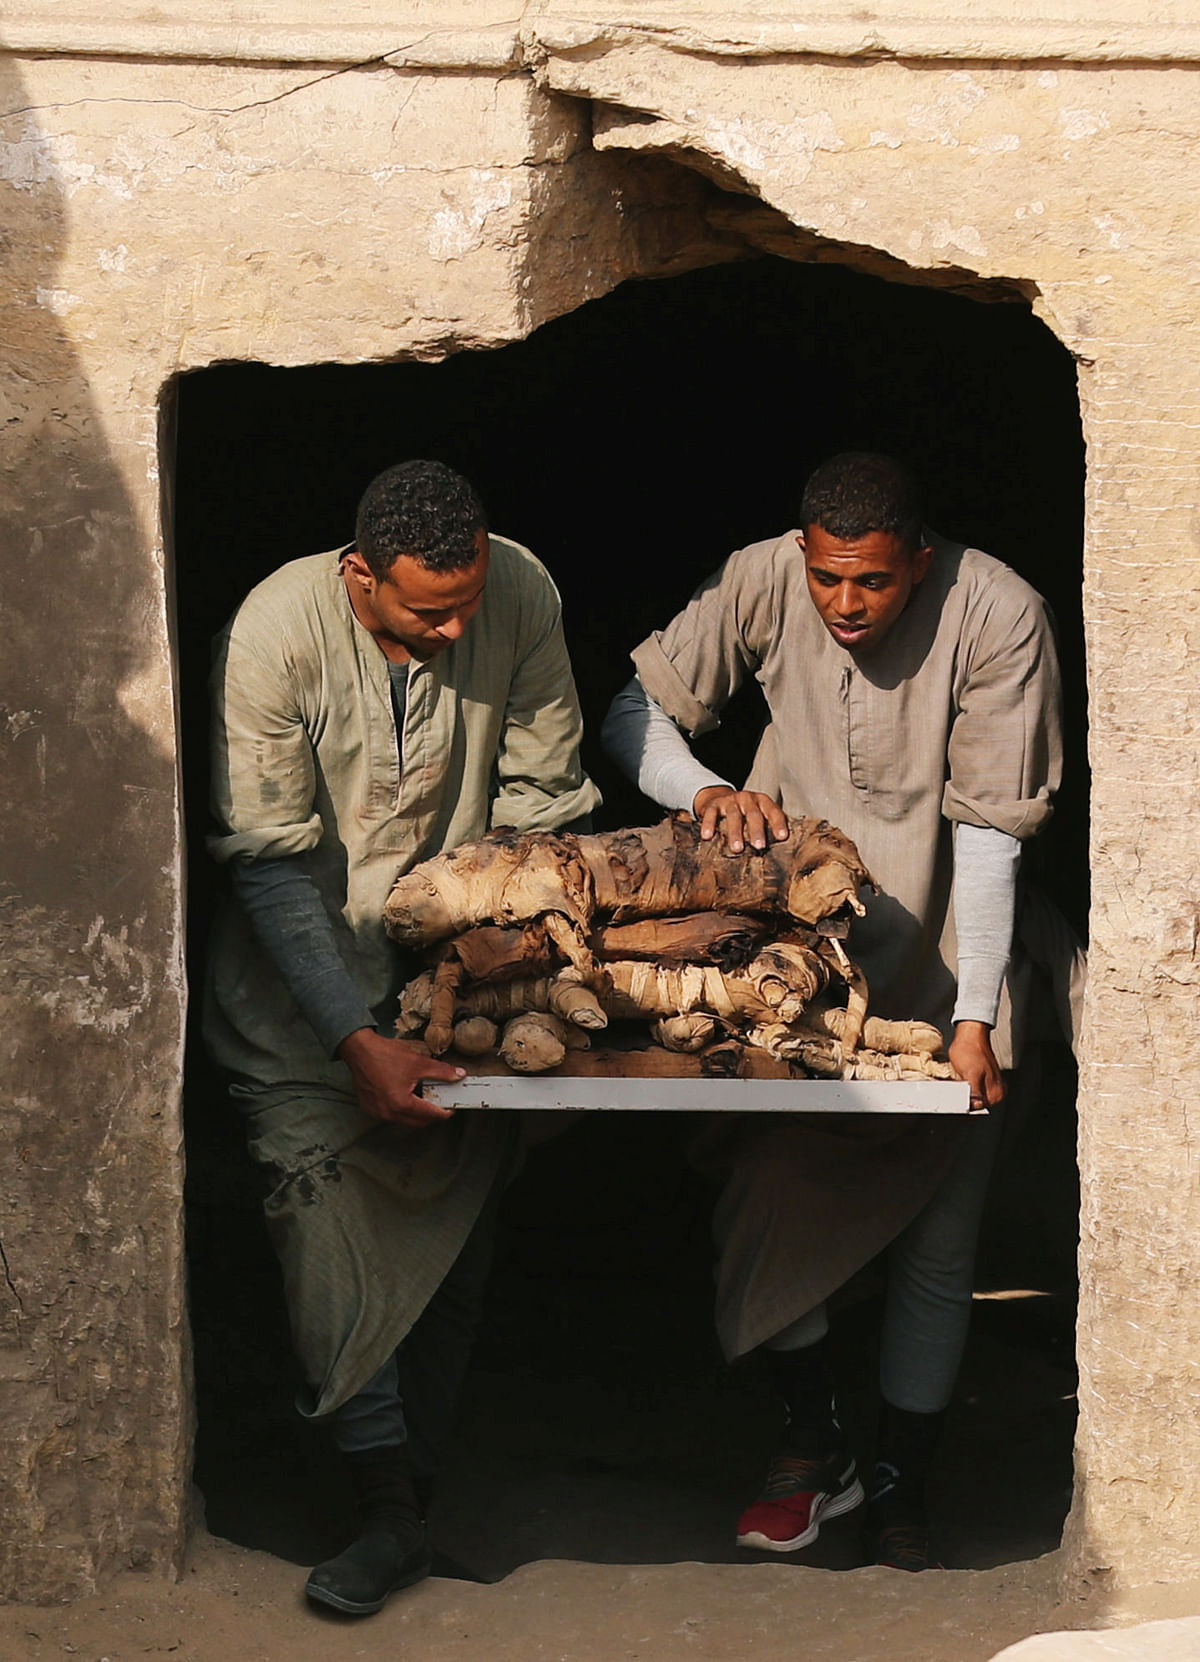 Workers carry mummified cats outside the tomb of Khufu-Imhat, at the Saqqara area near its necropolis, in Giza, Egypt on 10 November 2018. Photo: Reuters